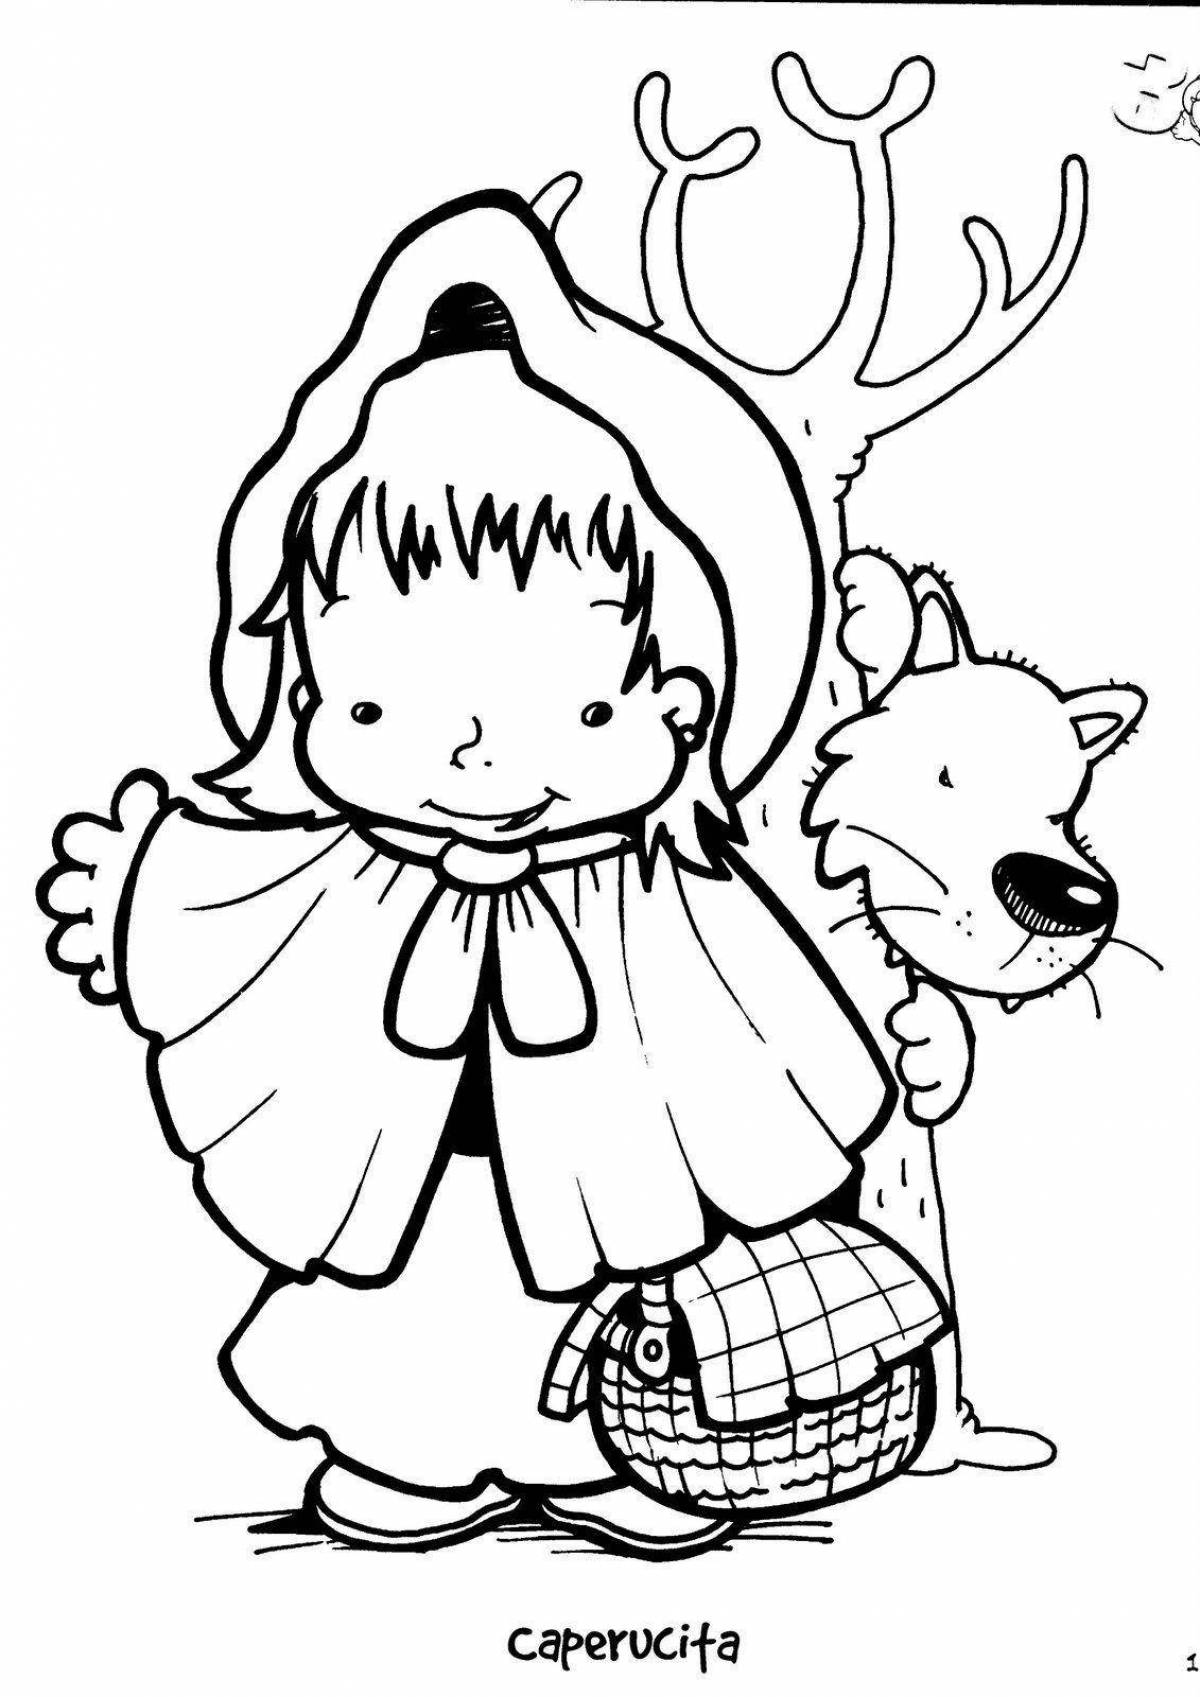 Fun coloring little red riding hood